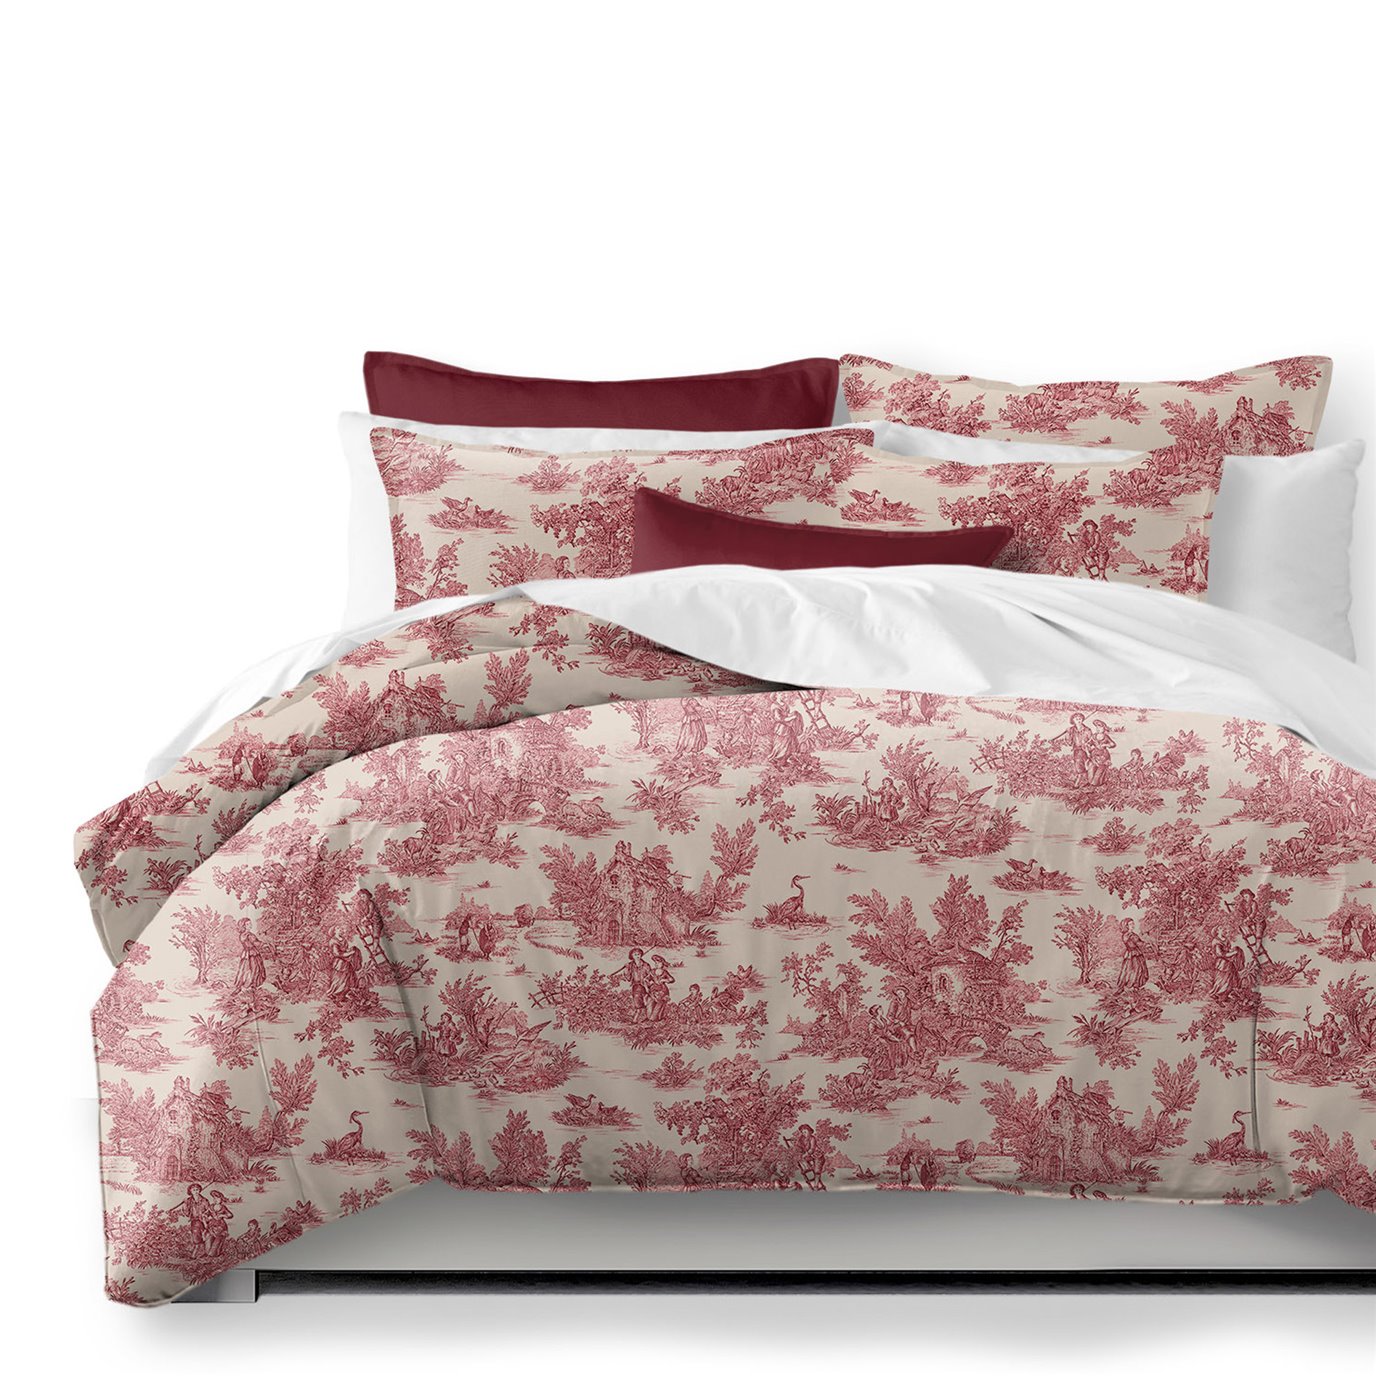 Bouclair Red Duvet Cover and Pillow Sham(s) Set - Size Super King